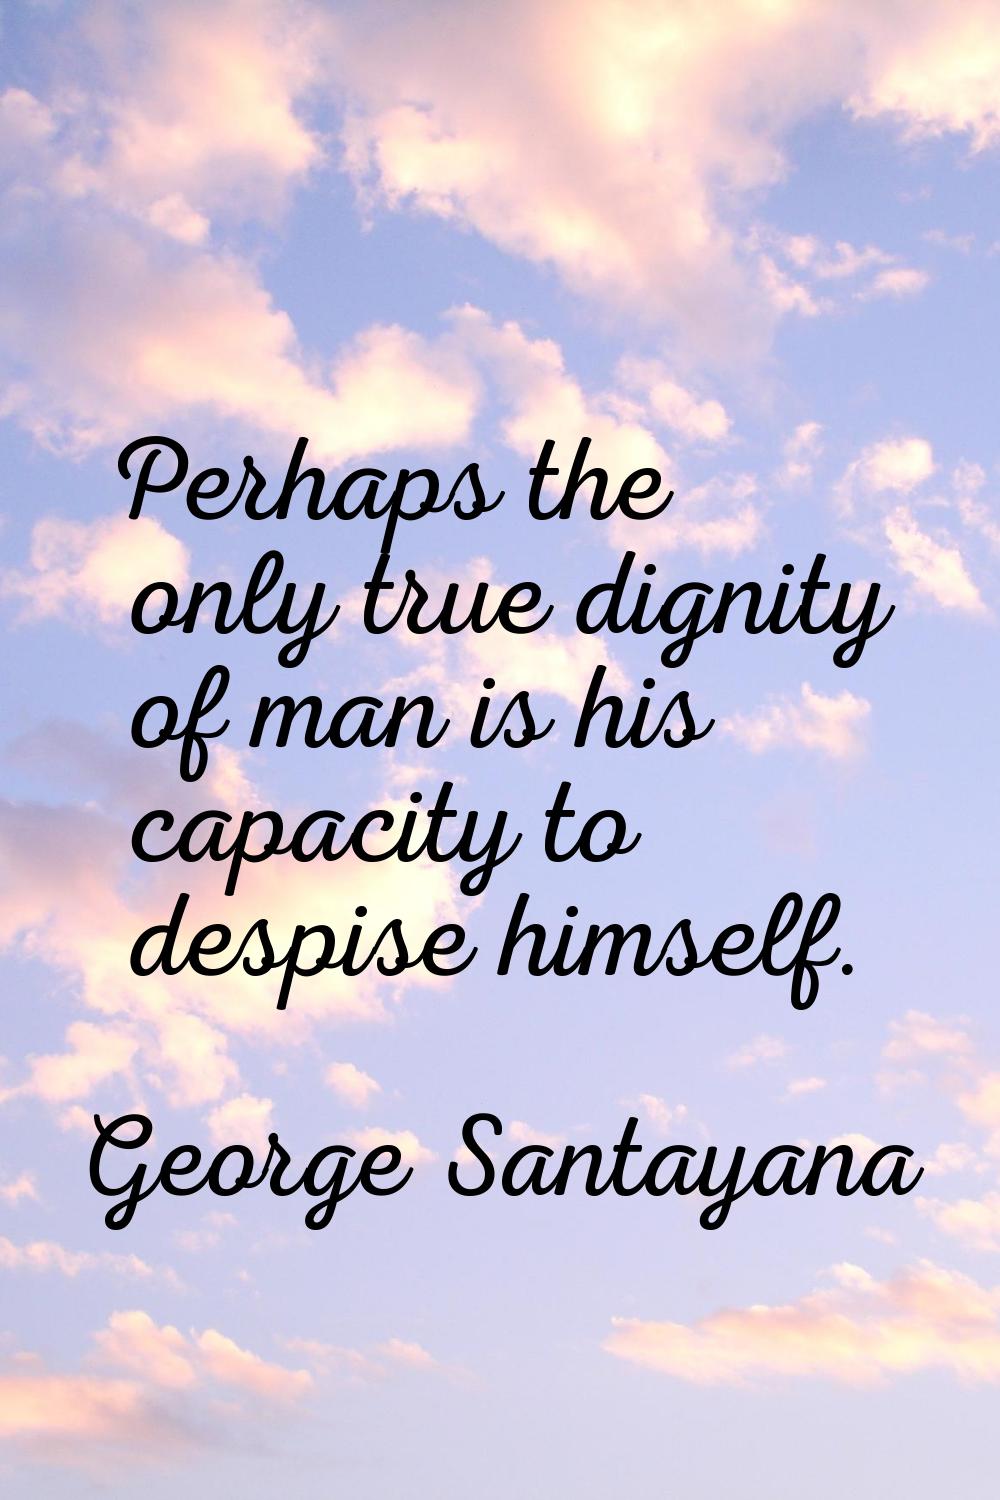 Perhaps the only true dignity of man is his capacity to despise himself.